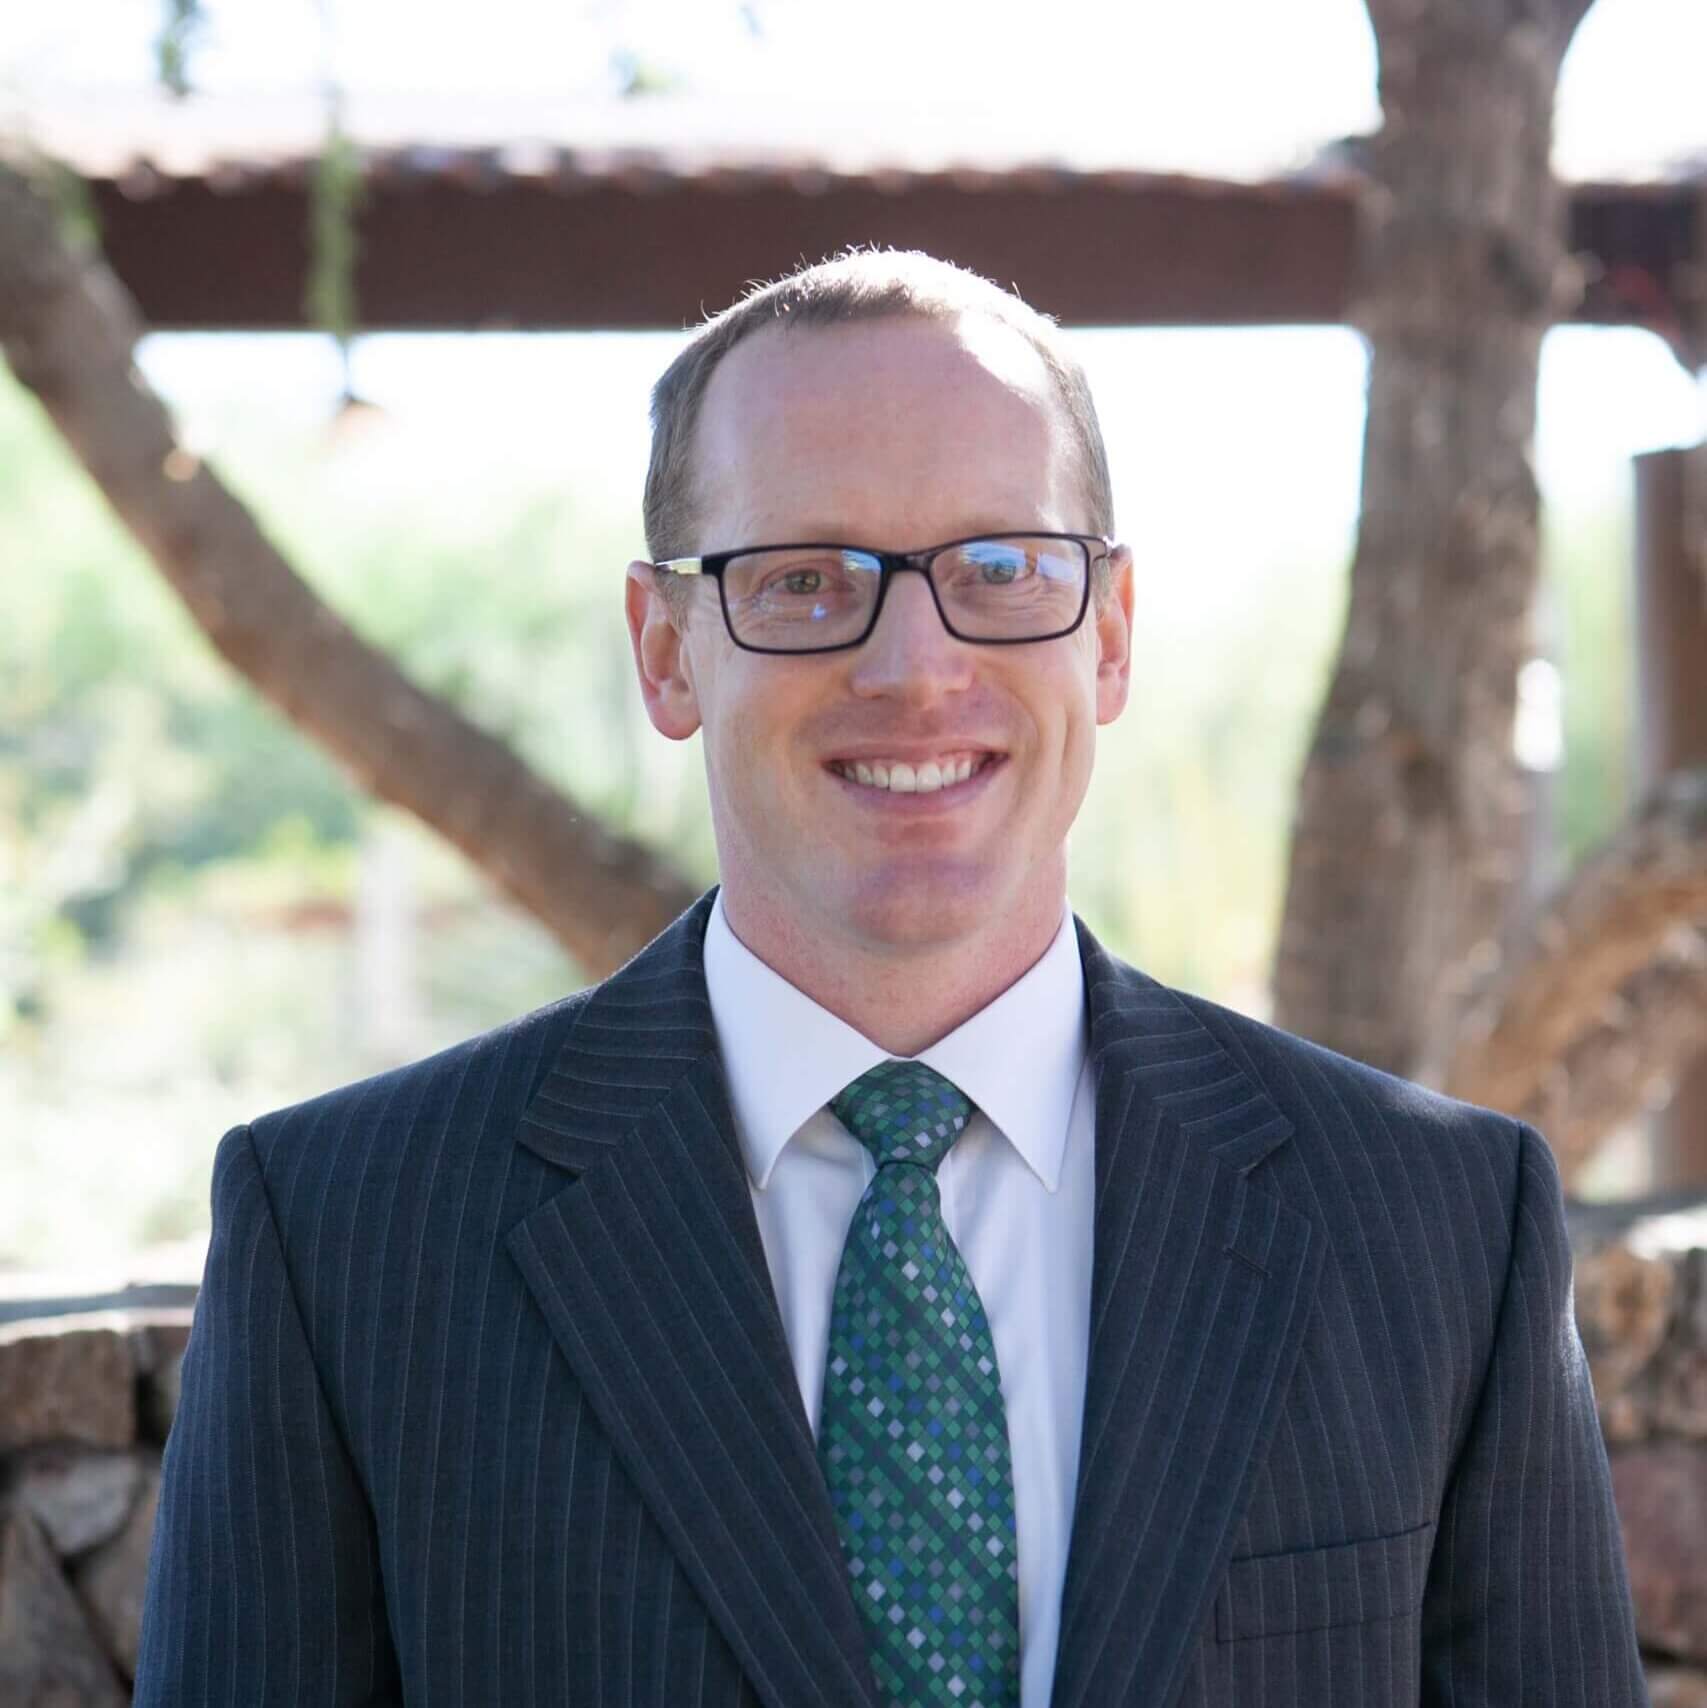 Trevor Rosenlof, a male optometrist with a dark suit and green tie